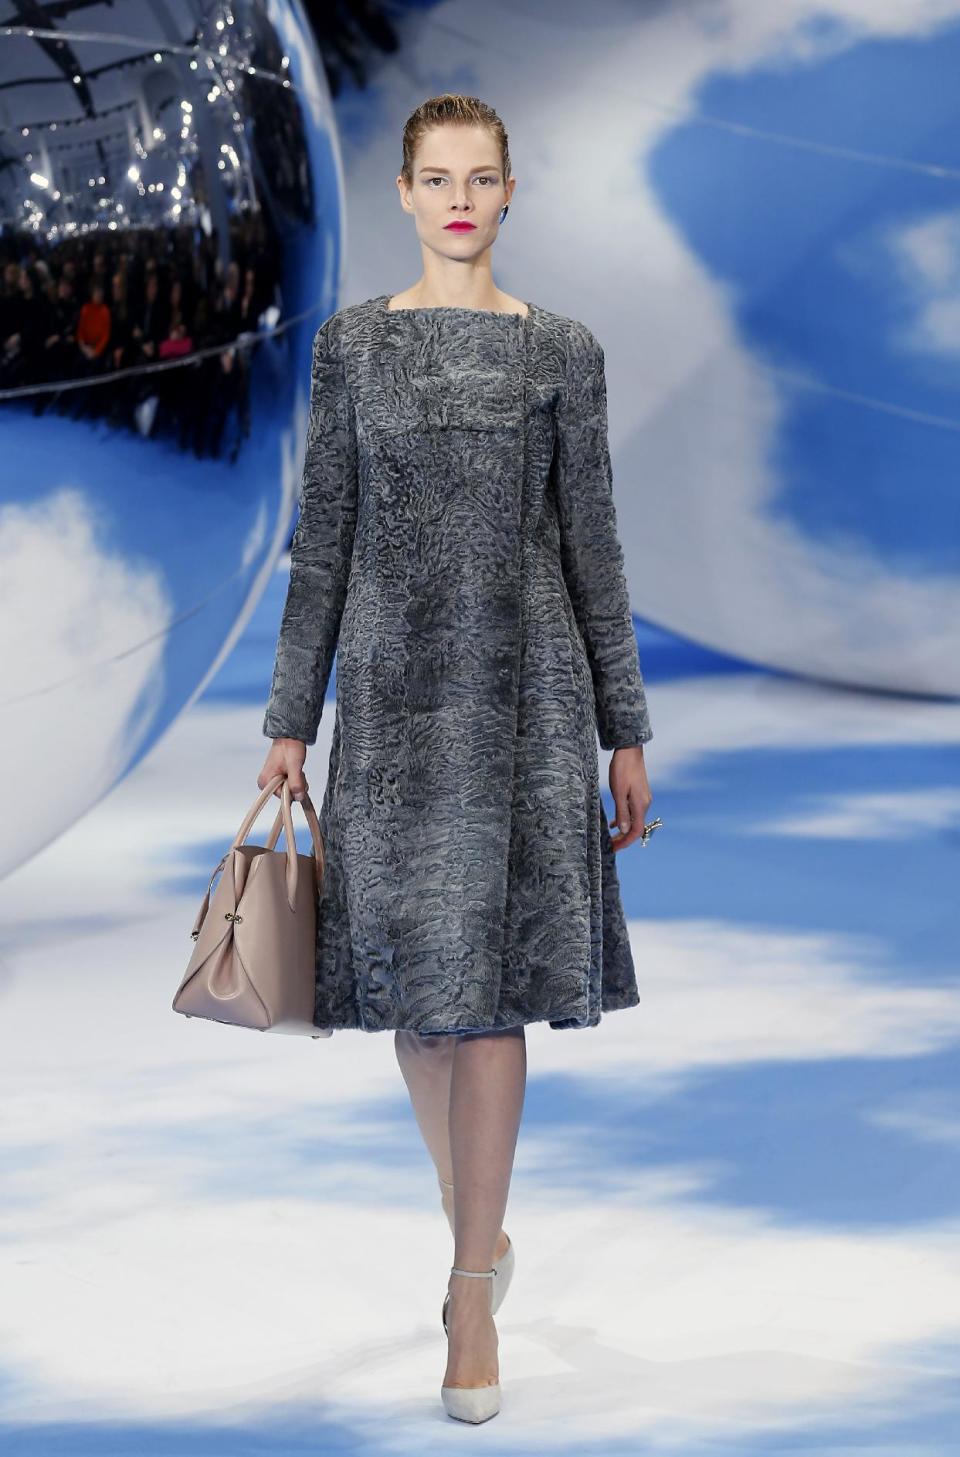 A model wears a creation by designer Raf Simons for Christian Dior's Ready to Wear Fall-Winter 2013-2014 fashion collection, presented, Thursday, March.1, 2013 in Paris. (AP Photo/Jacques Brinon)